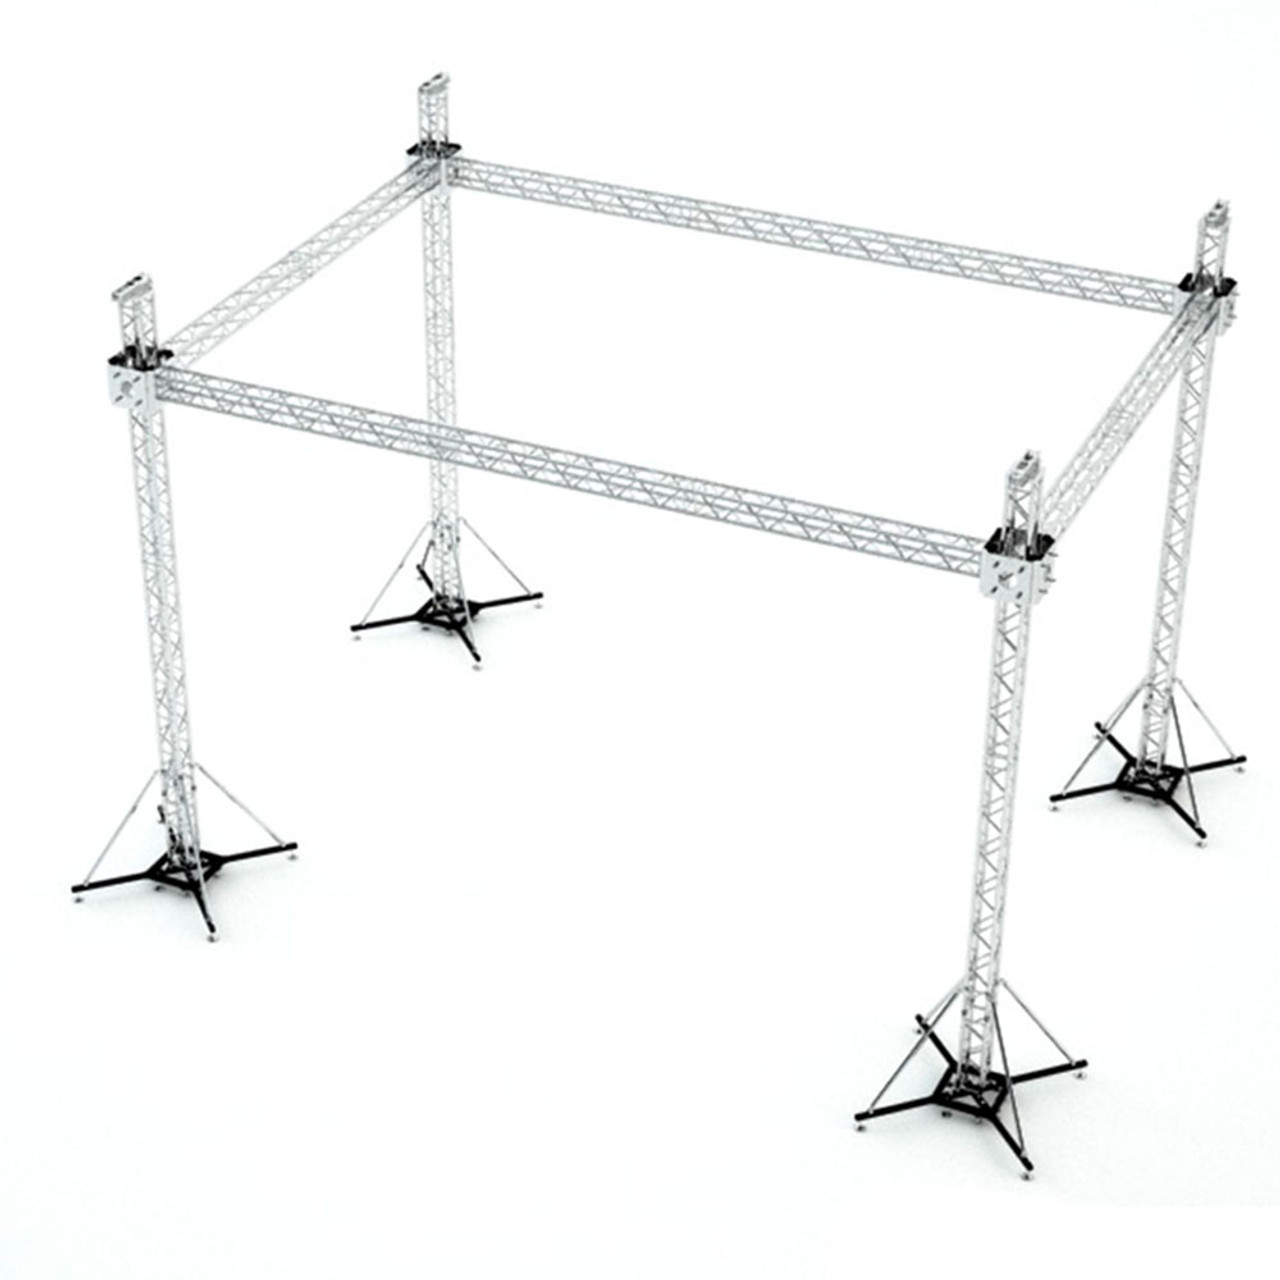 ProX XTP-GS302023 Stage Flat Roofing System Package With 4 Chain Hoists-30 Ft W x 20 Ft L x 23 Ft H